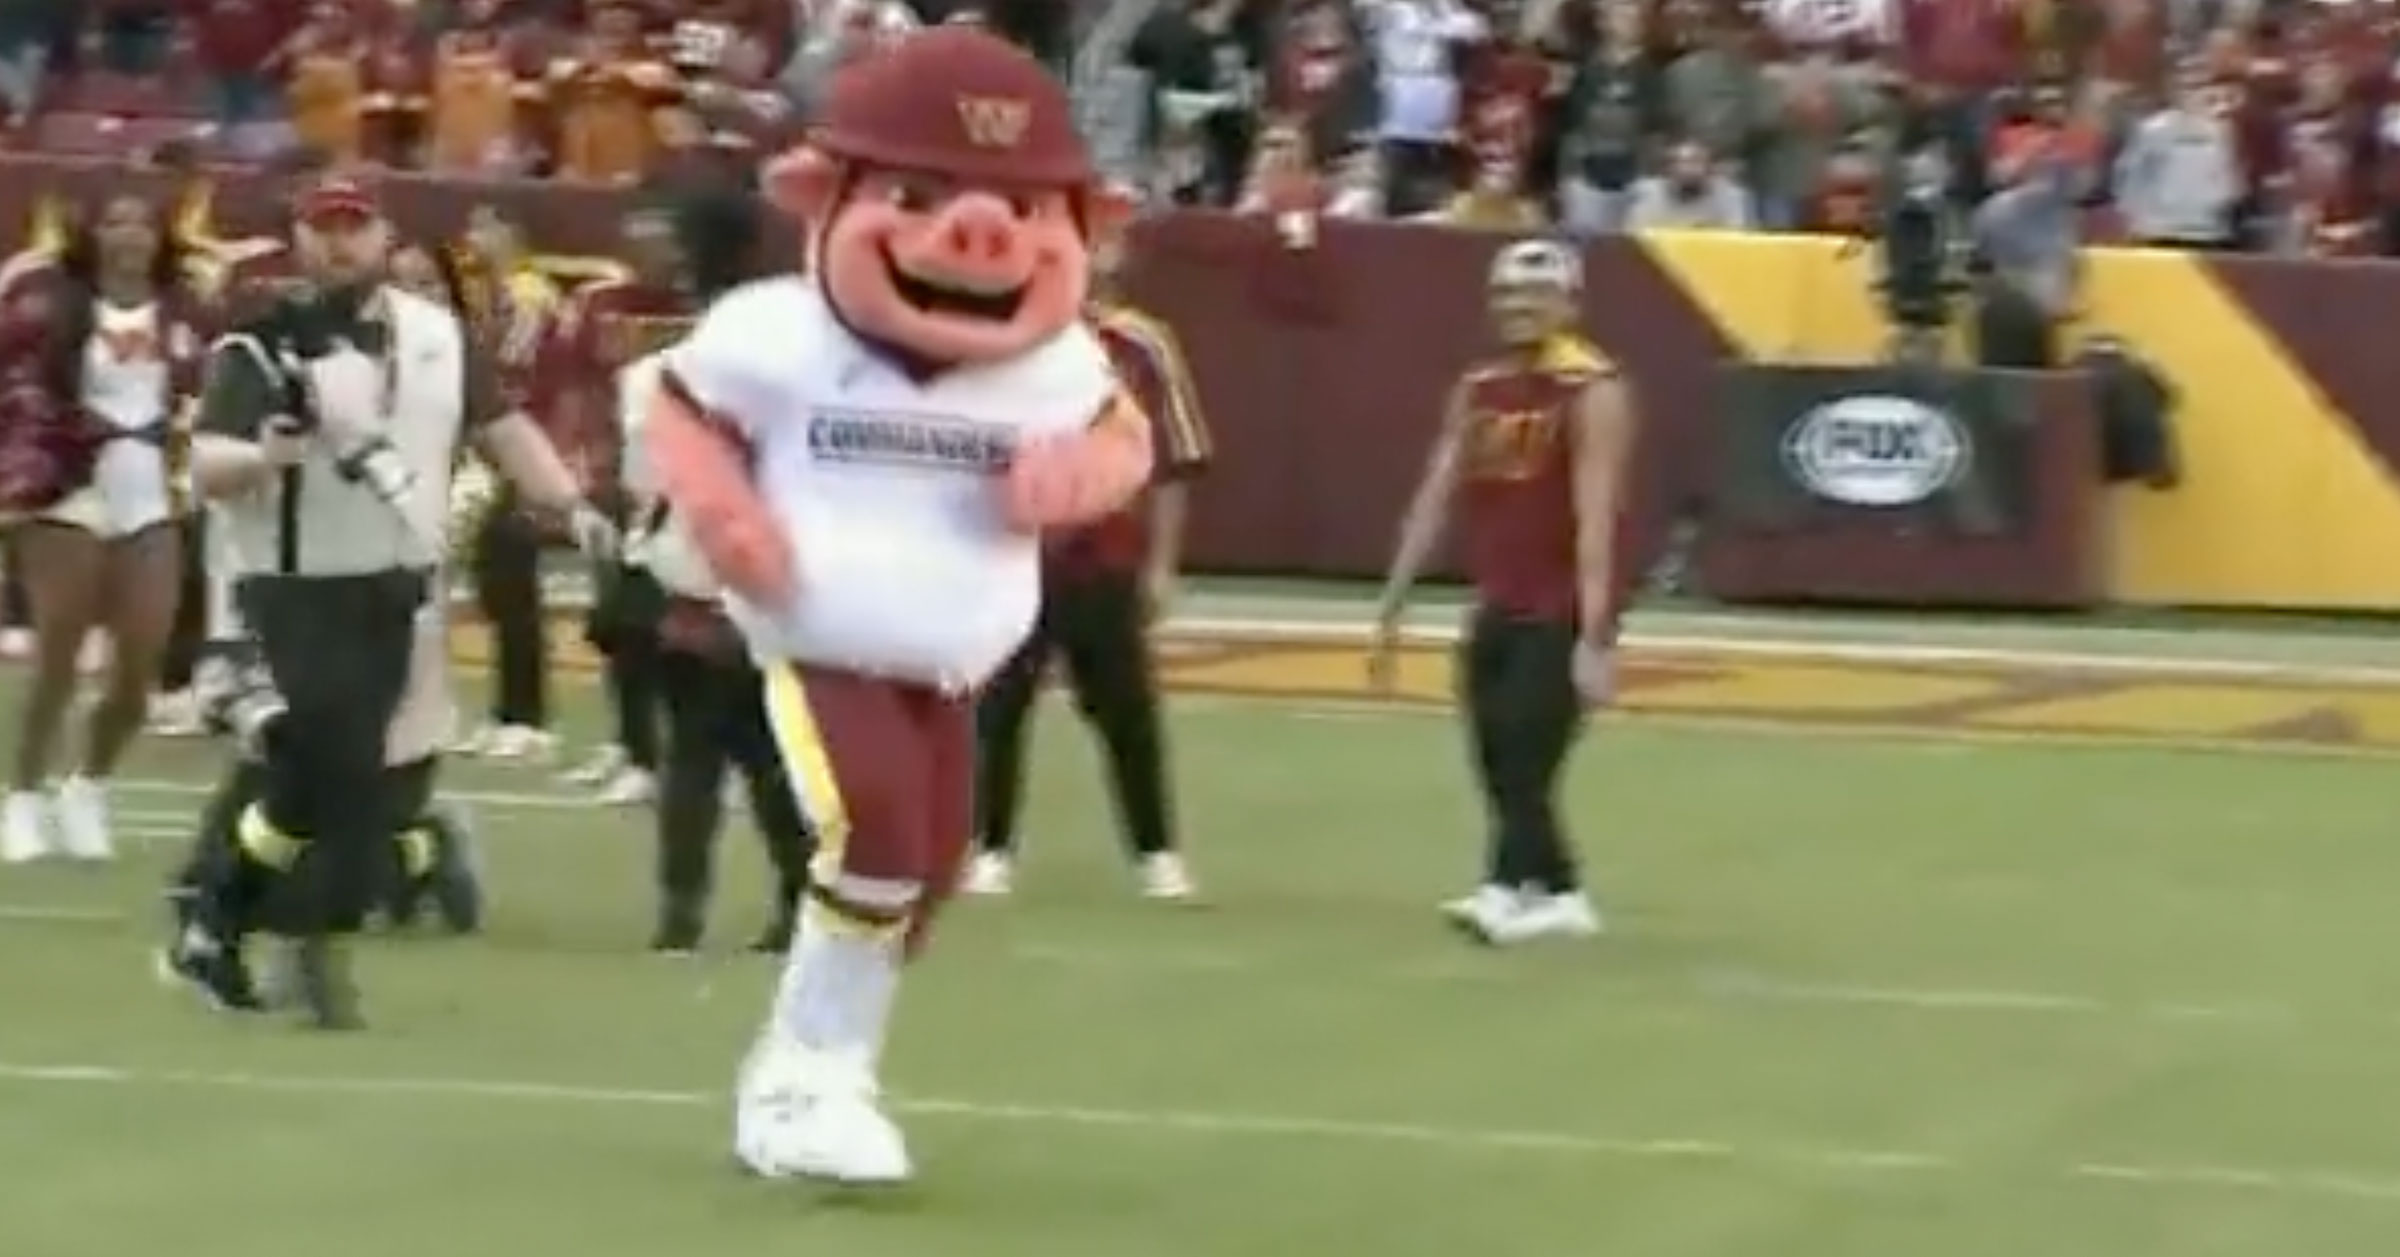 Washington Commanders Unveil Their New Mascot 'Major Tuddy', And It's